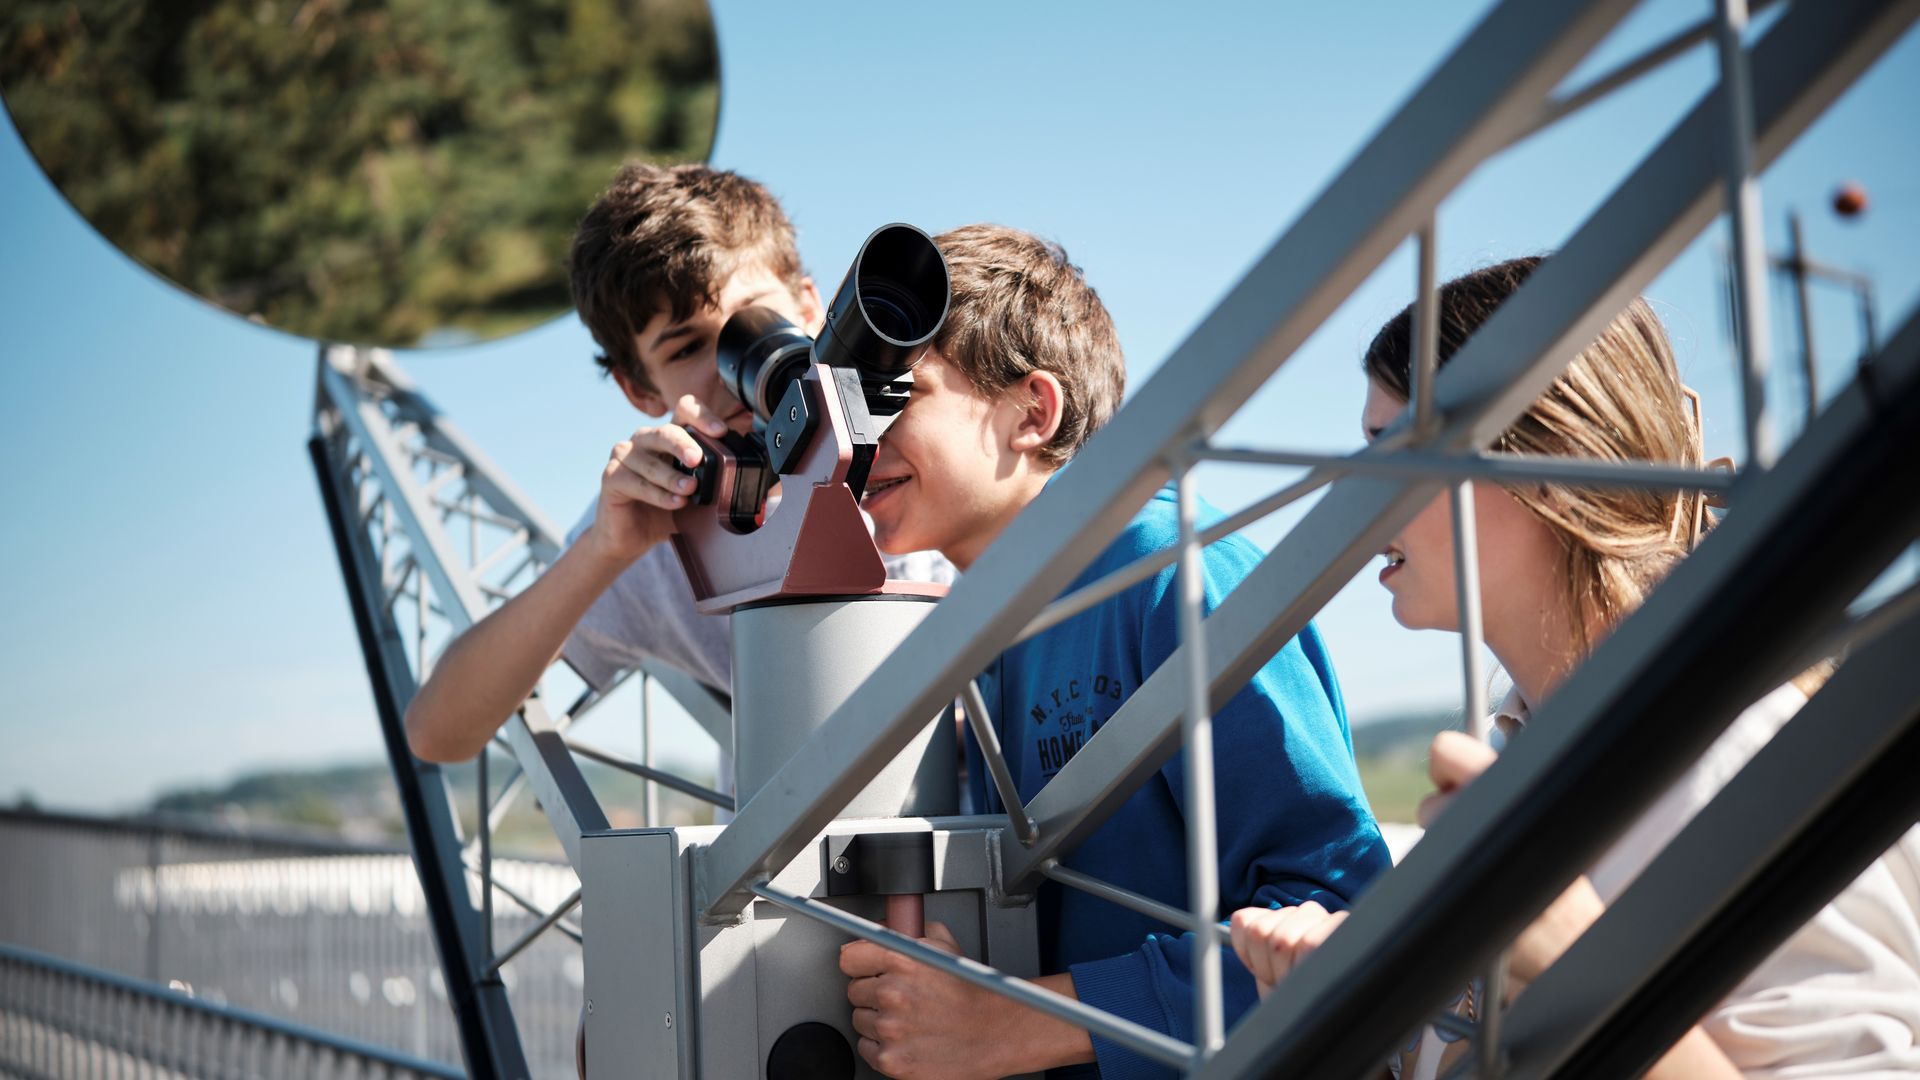 Students look through a small telescope in the outdoor area of the Technorama.